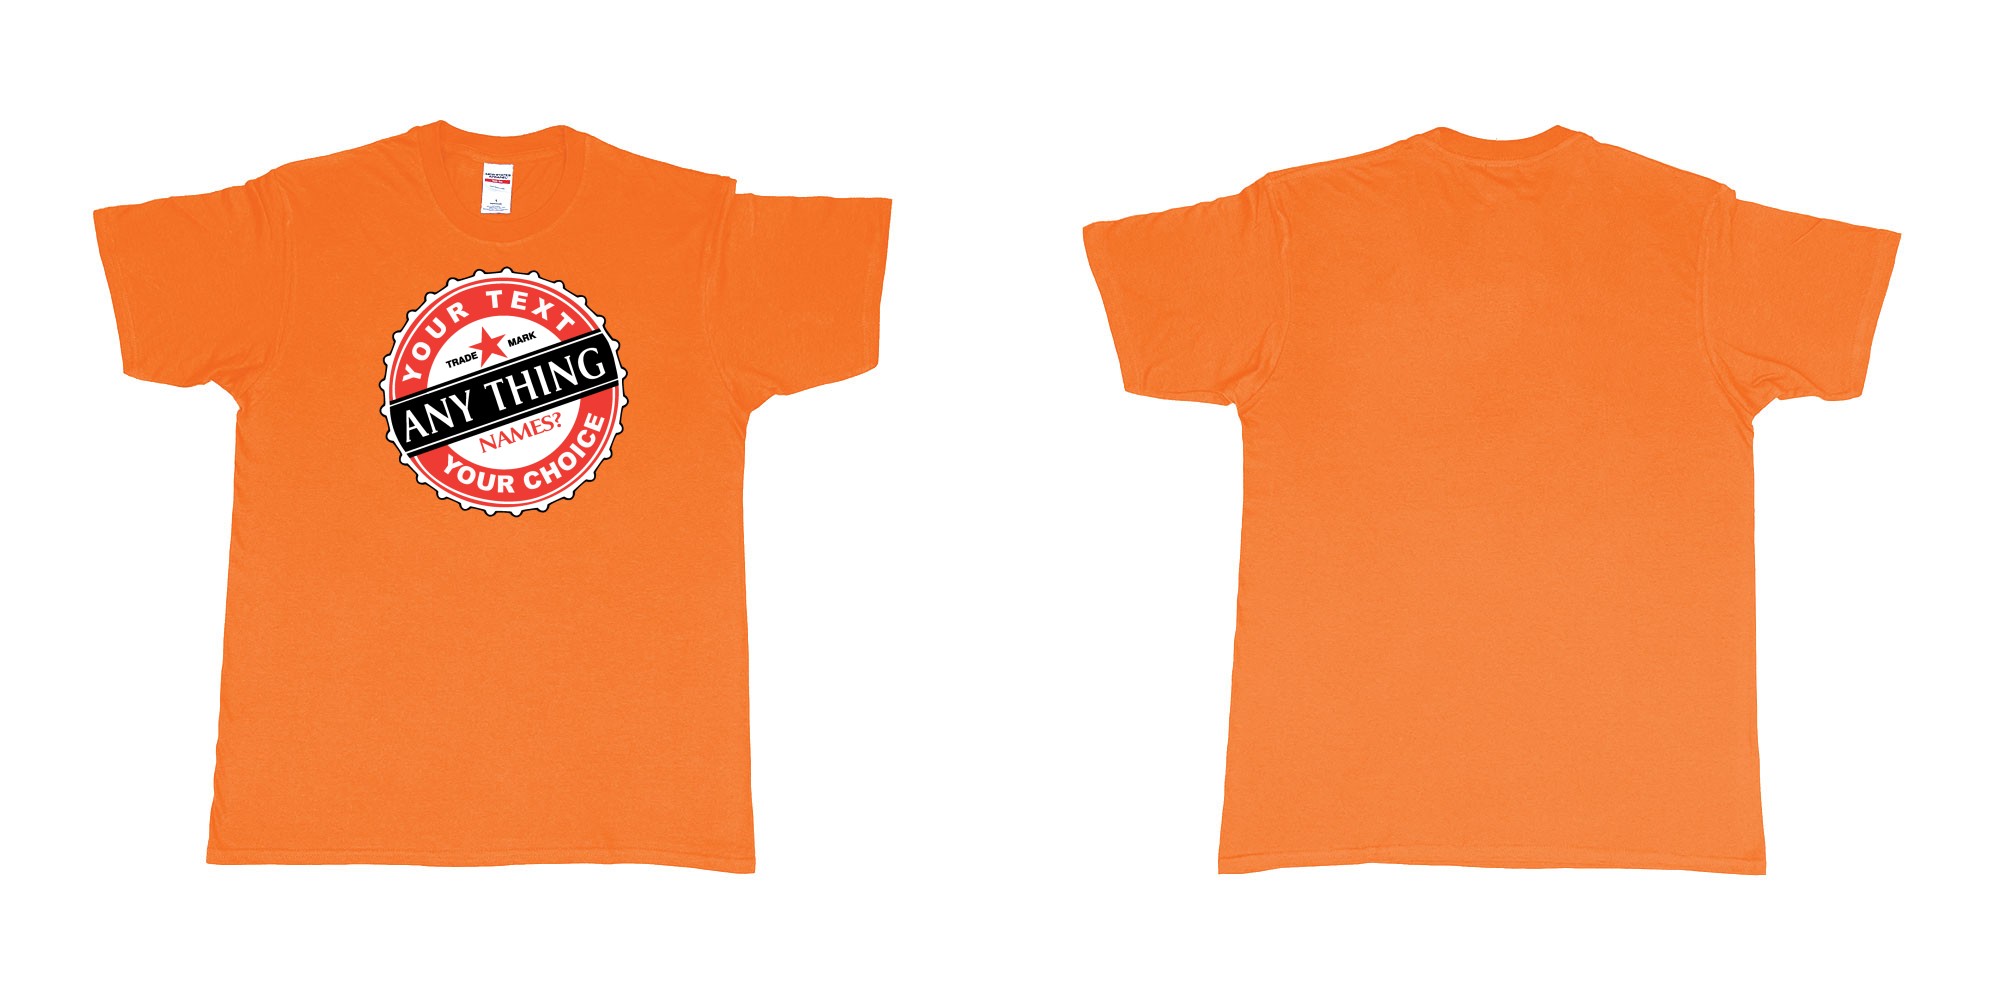 Custom tshirt design bintang in fabric color orange choice your own text made in Bali by The Pirate Way